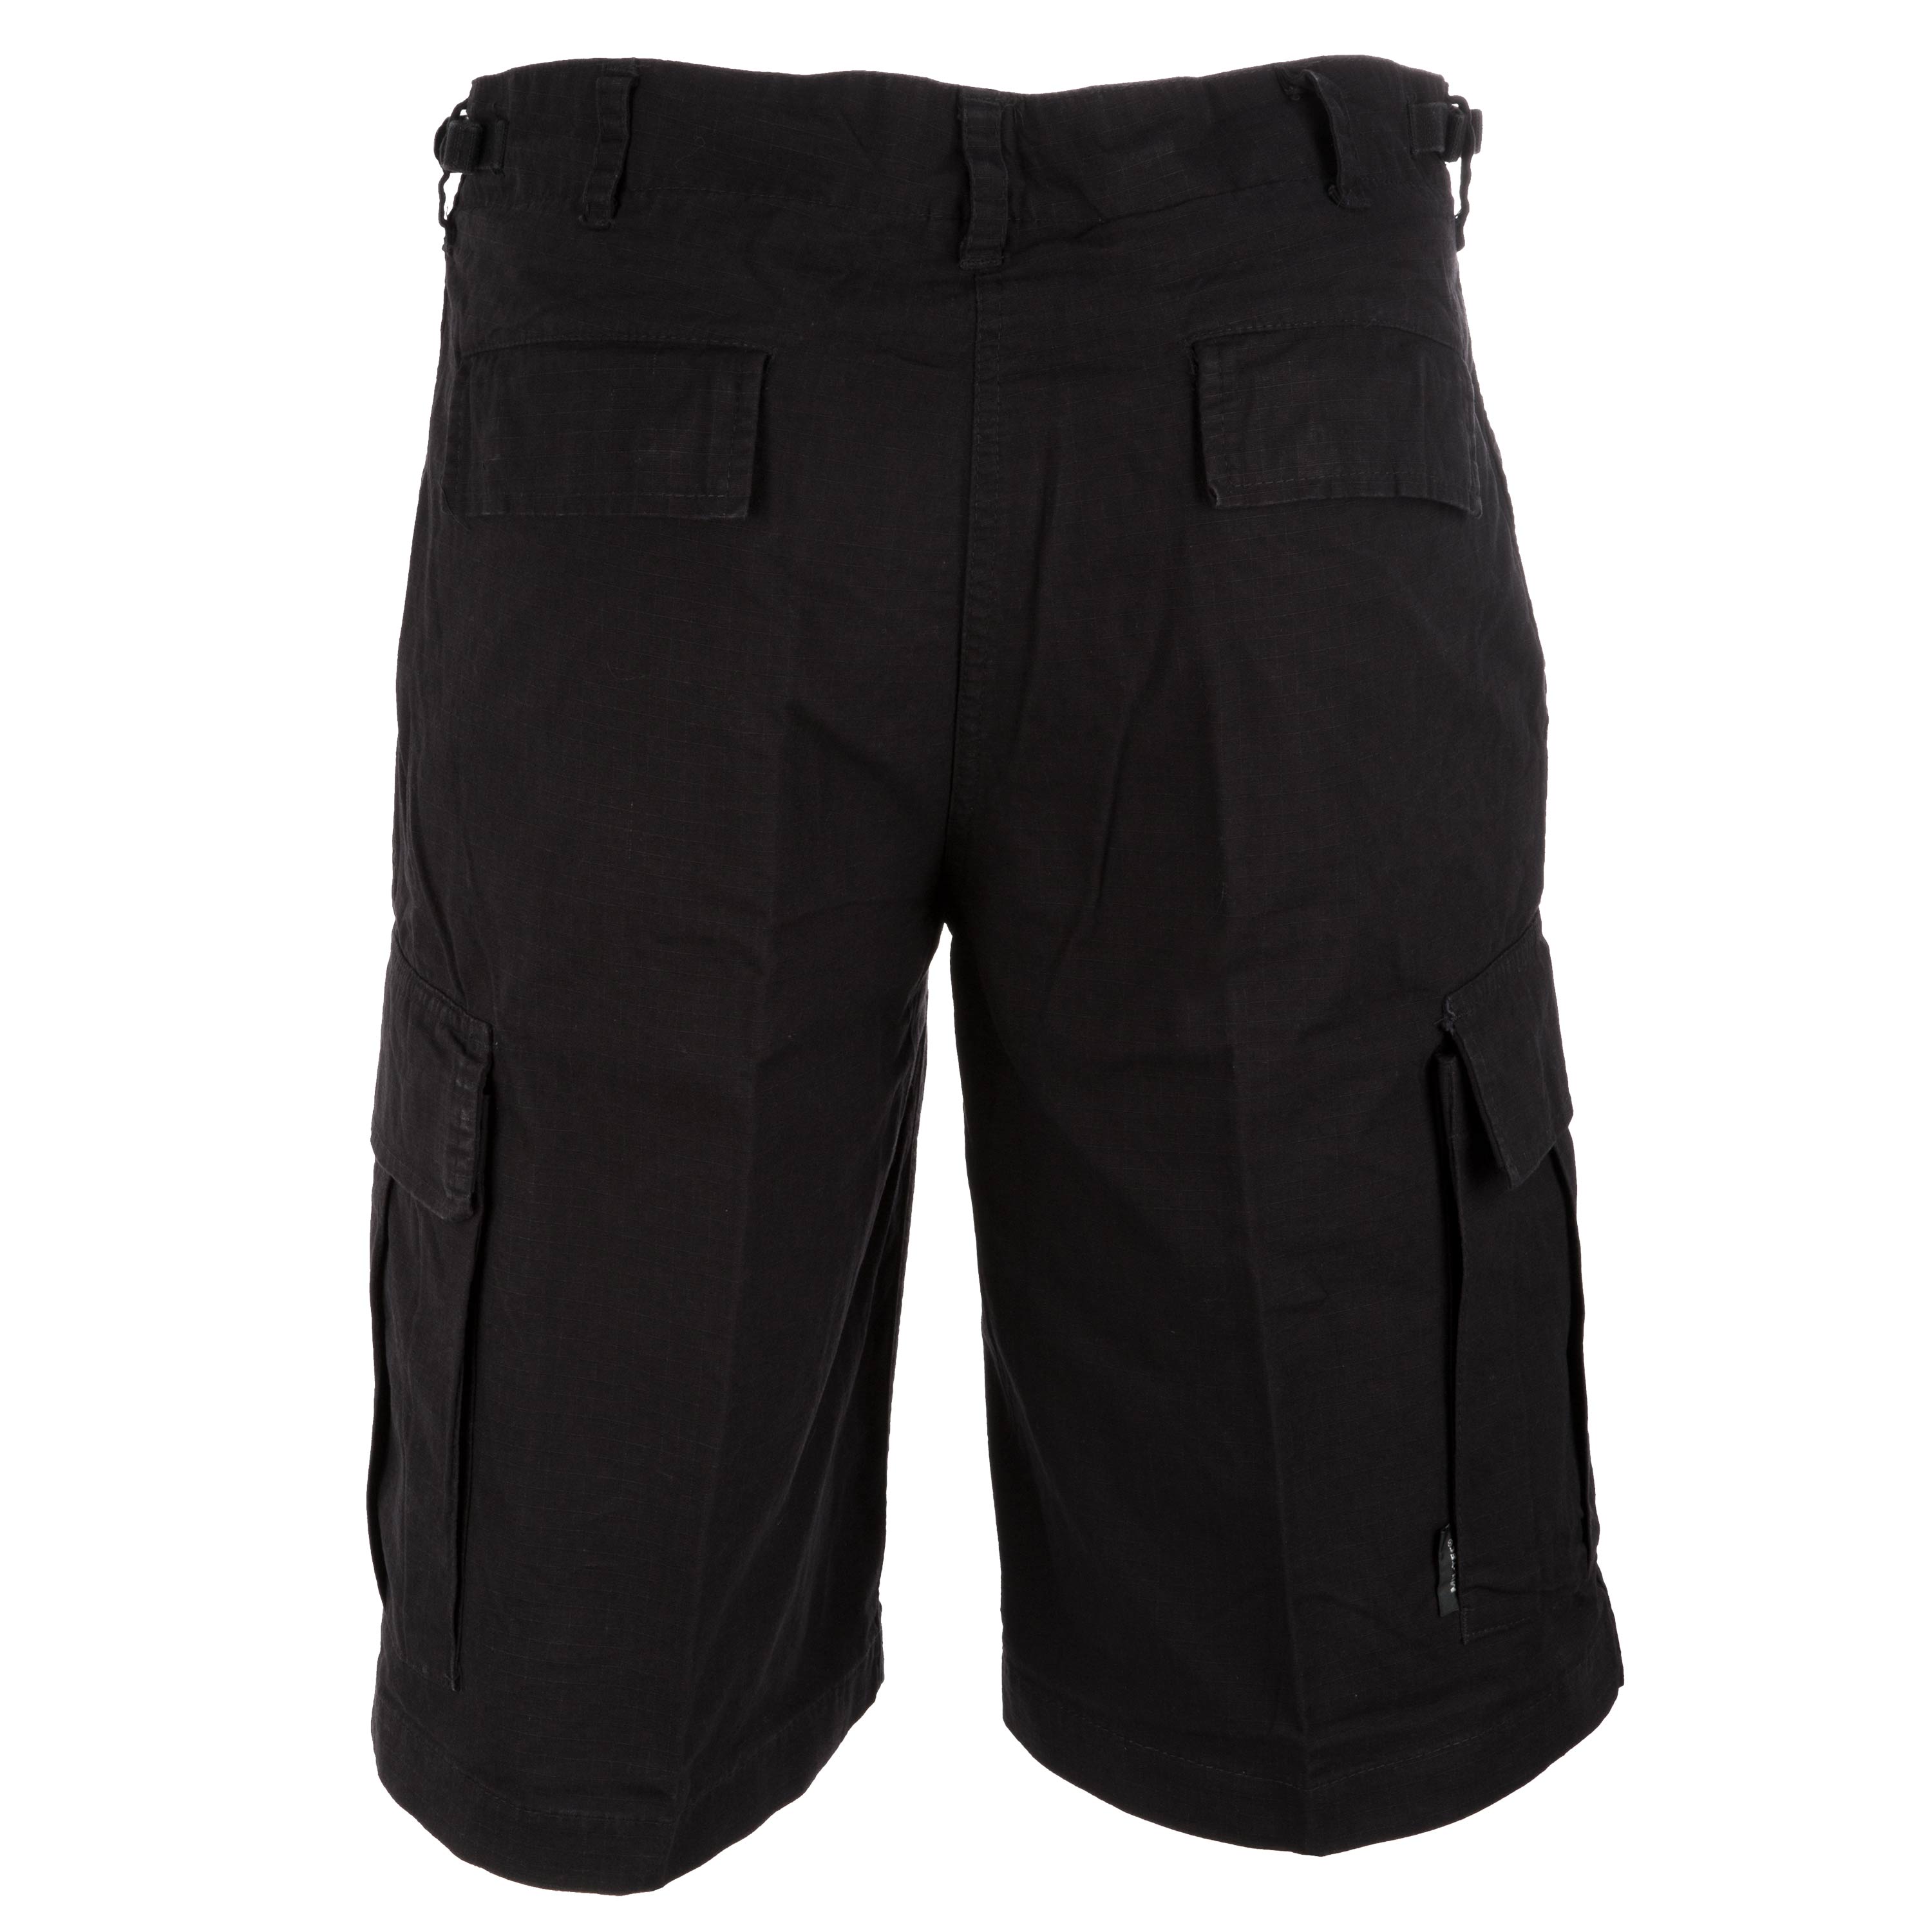 Purchase the Bermuda Shorts Rip-Stop Washed black by ASMC